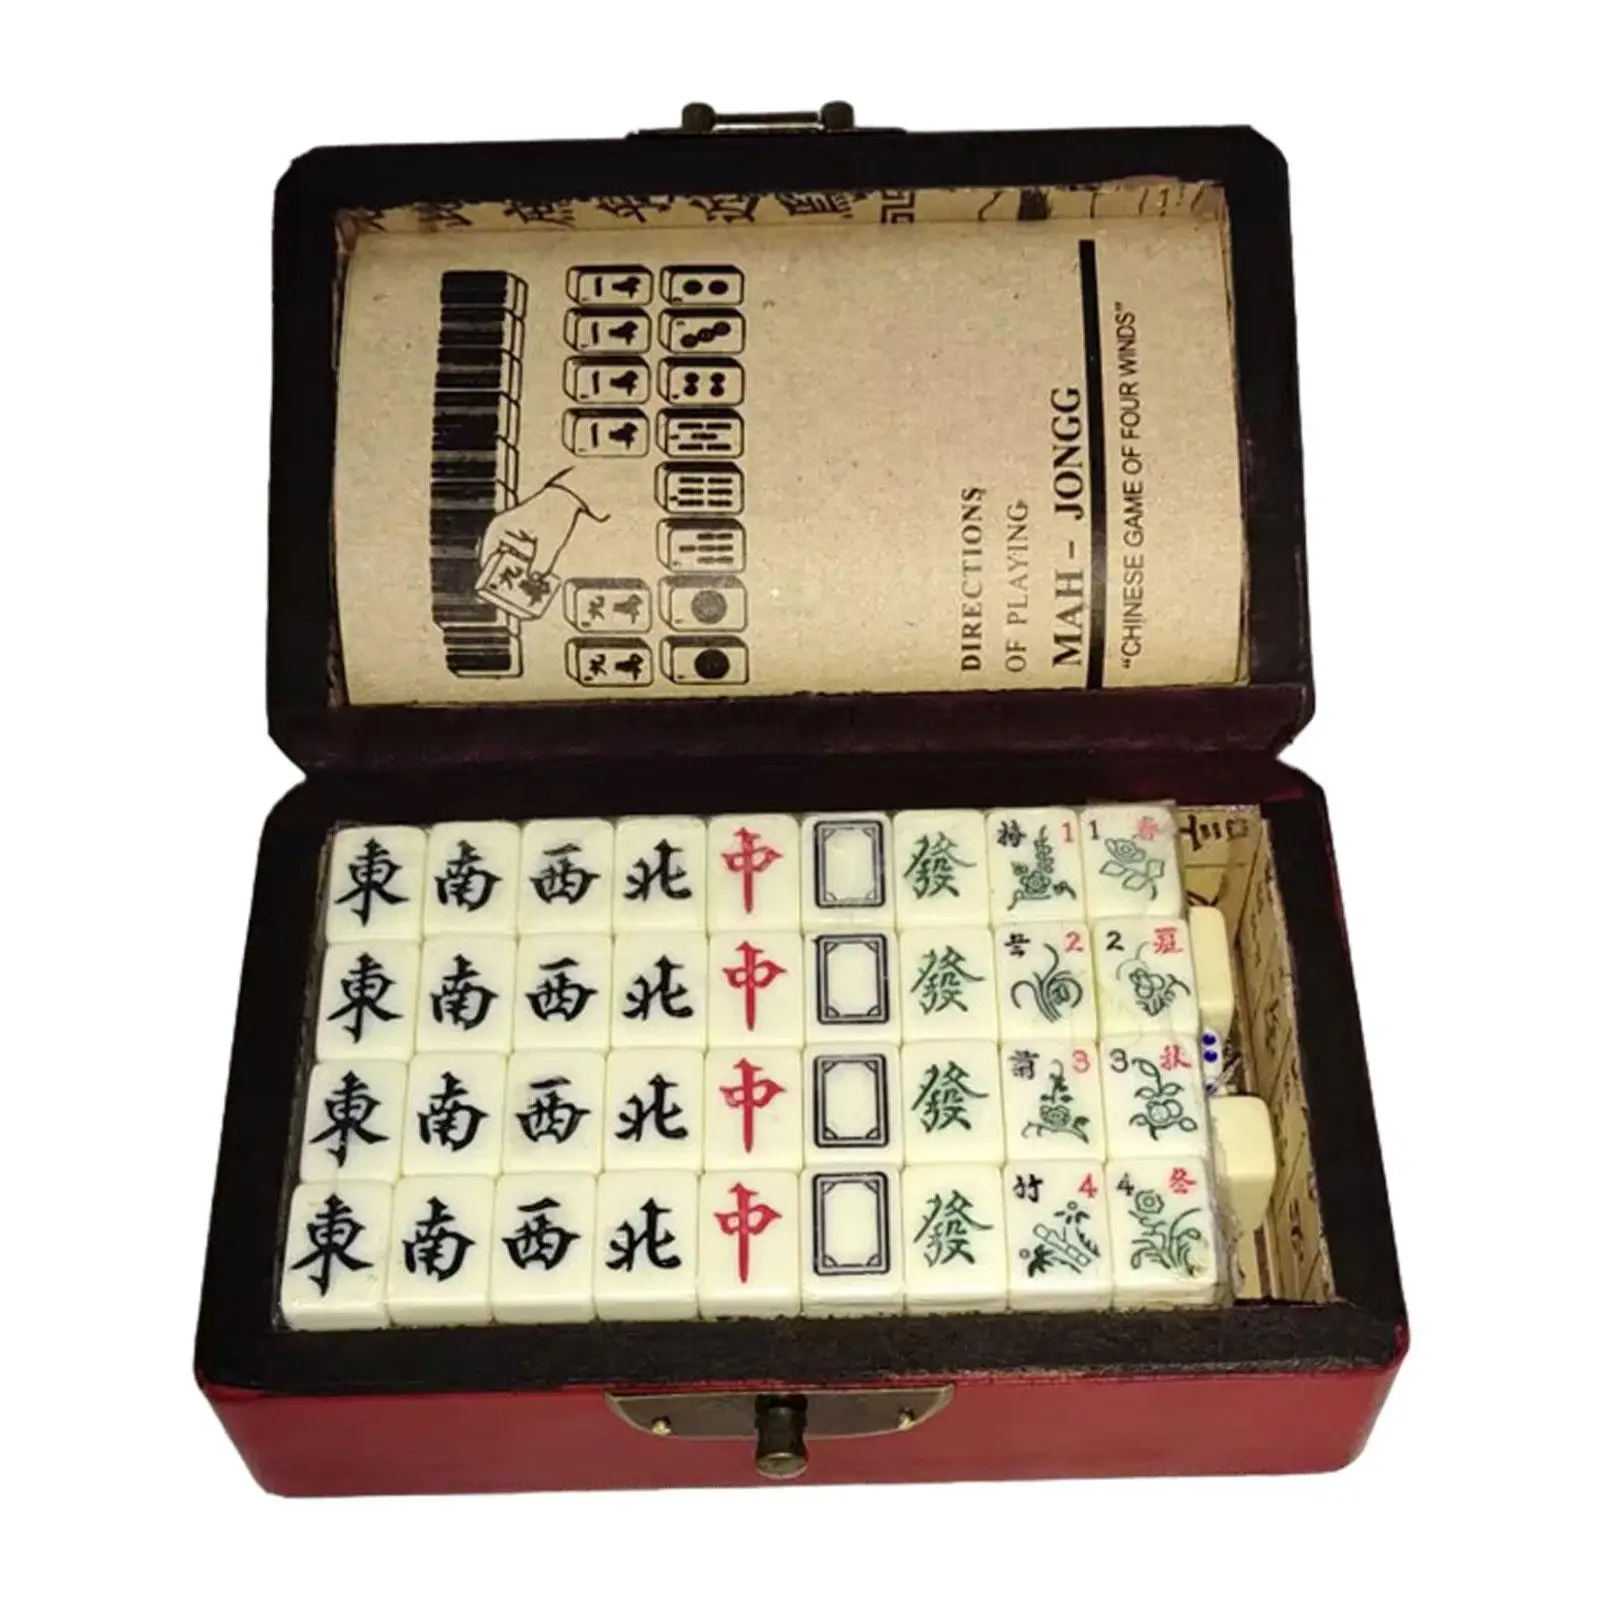 Chinese Mahjong Game Set Family Mahjong Game Leisure Game Classic Board Game for Festival Travel Family Gathering Home Party